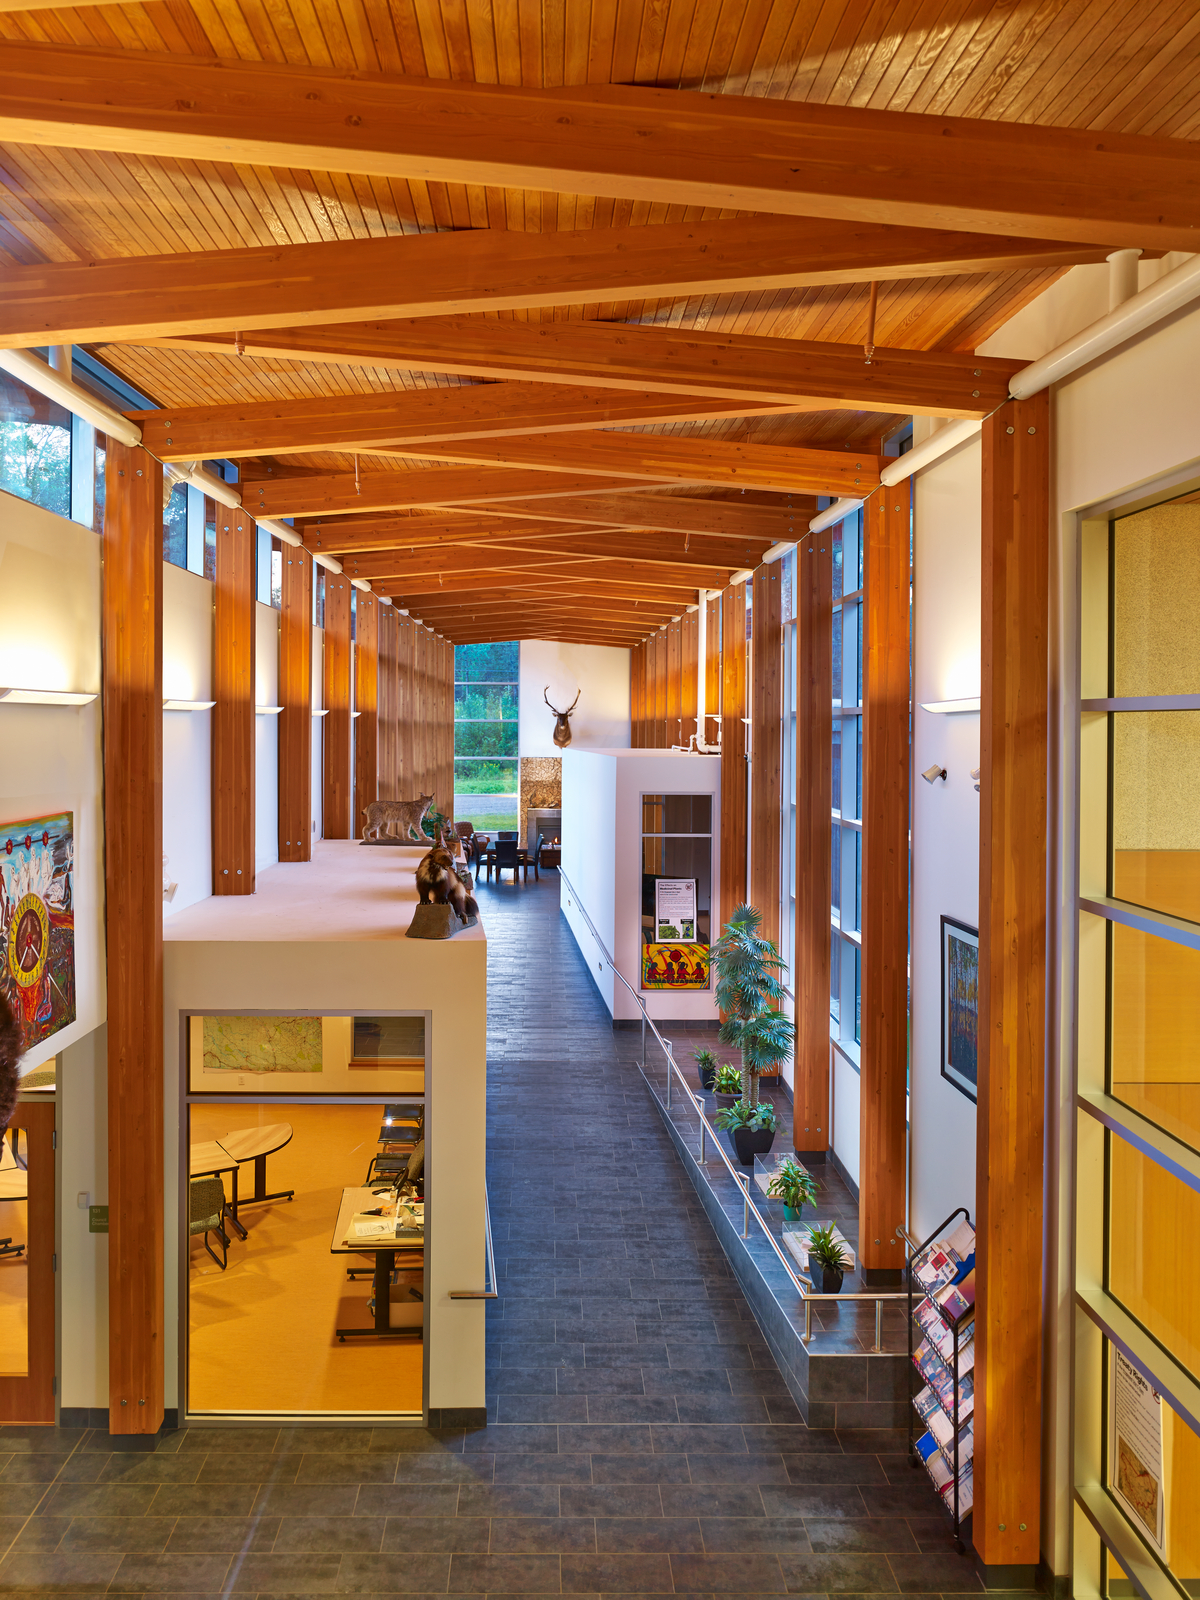 Interior daytime image of brightly lit Prophet River Multiplex main atrium showing downward tile walkway, glue-laminated timber (glulam) columns, crossed ceiling beams, and wood ceiling decking